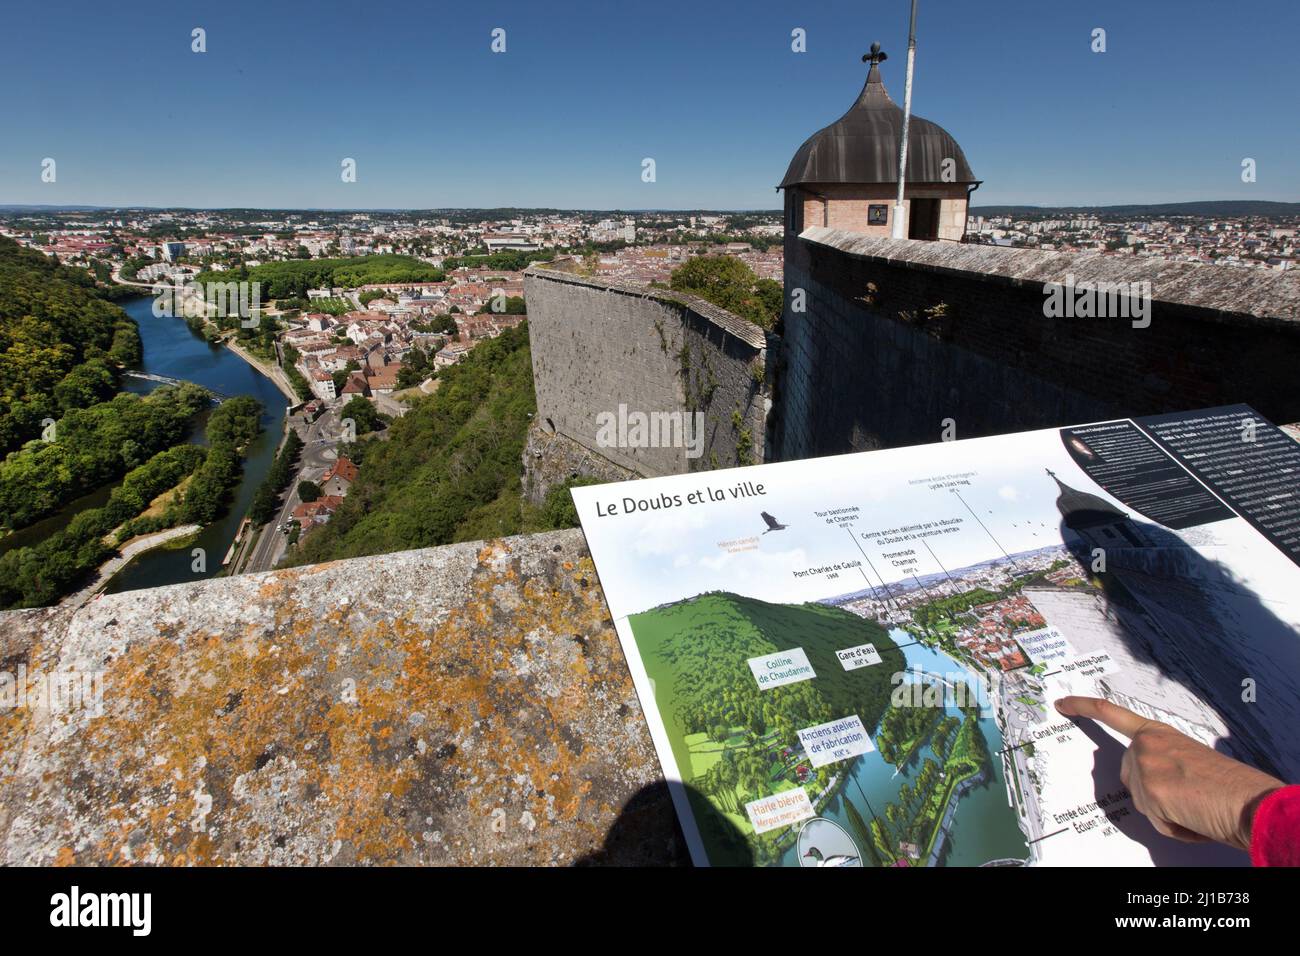 VIEW FROM THE TOP OF THE CITADEL'S RAMPARTS OVER THE CITY OF BESANCON AND THE CHAUDANNE HILL CROSSED BY THE DOUBS RIVER, BESANCON, (25) DOUBS, REGION BOURGOGNE-FRANCHE-COMTE, FRANCE Stock Photo